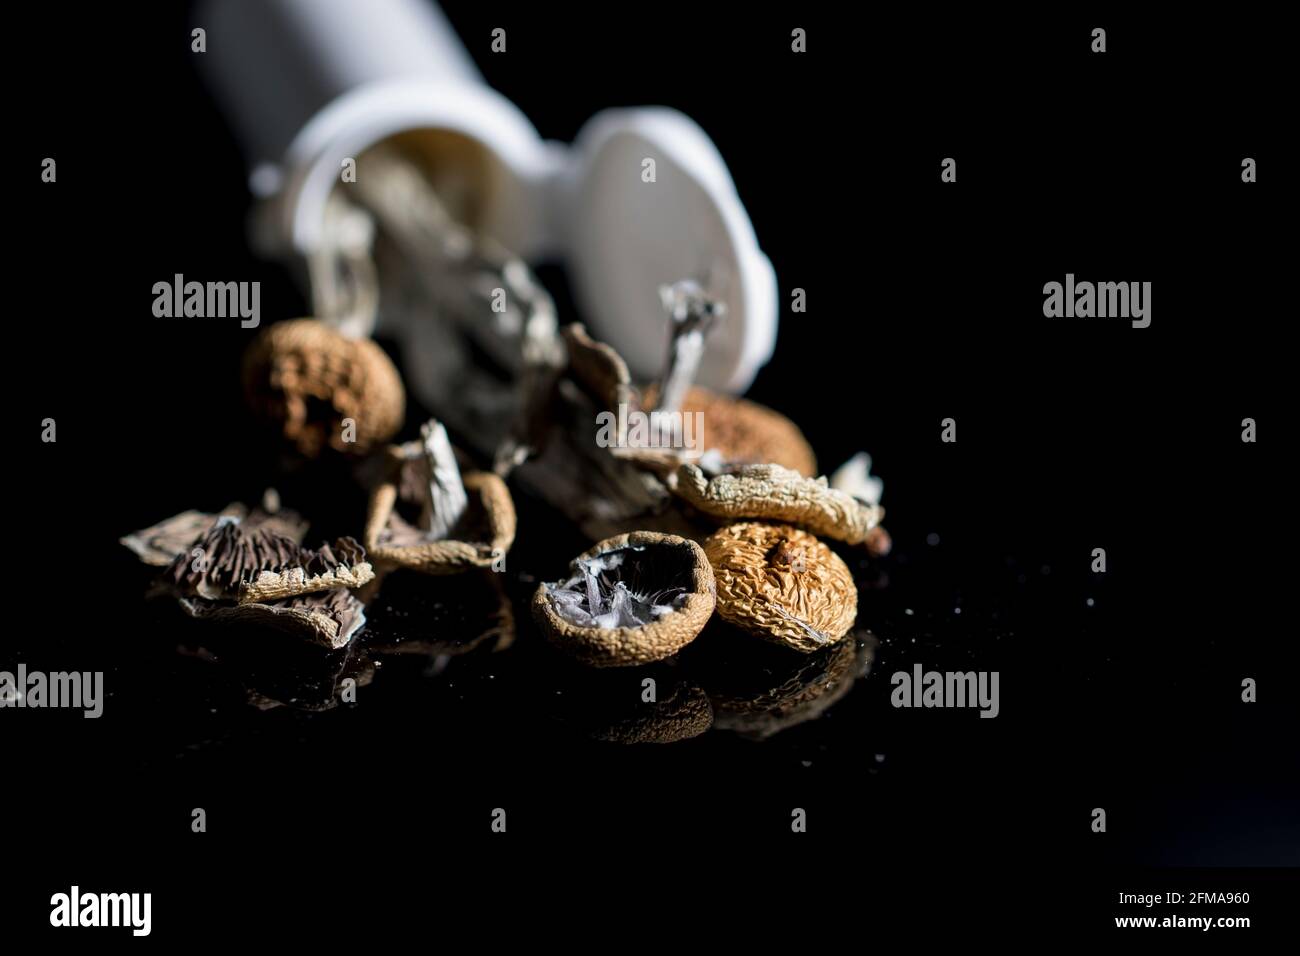 Psychedelic therapy close up medical magic mushrooms used to treat mental illness. Alternative plant medicine. Stock Photo